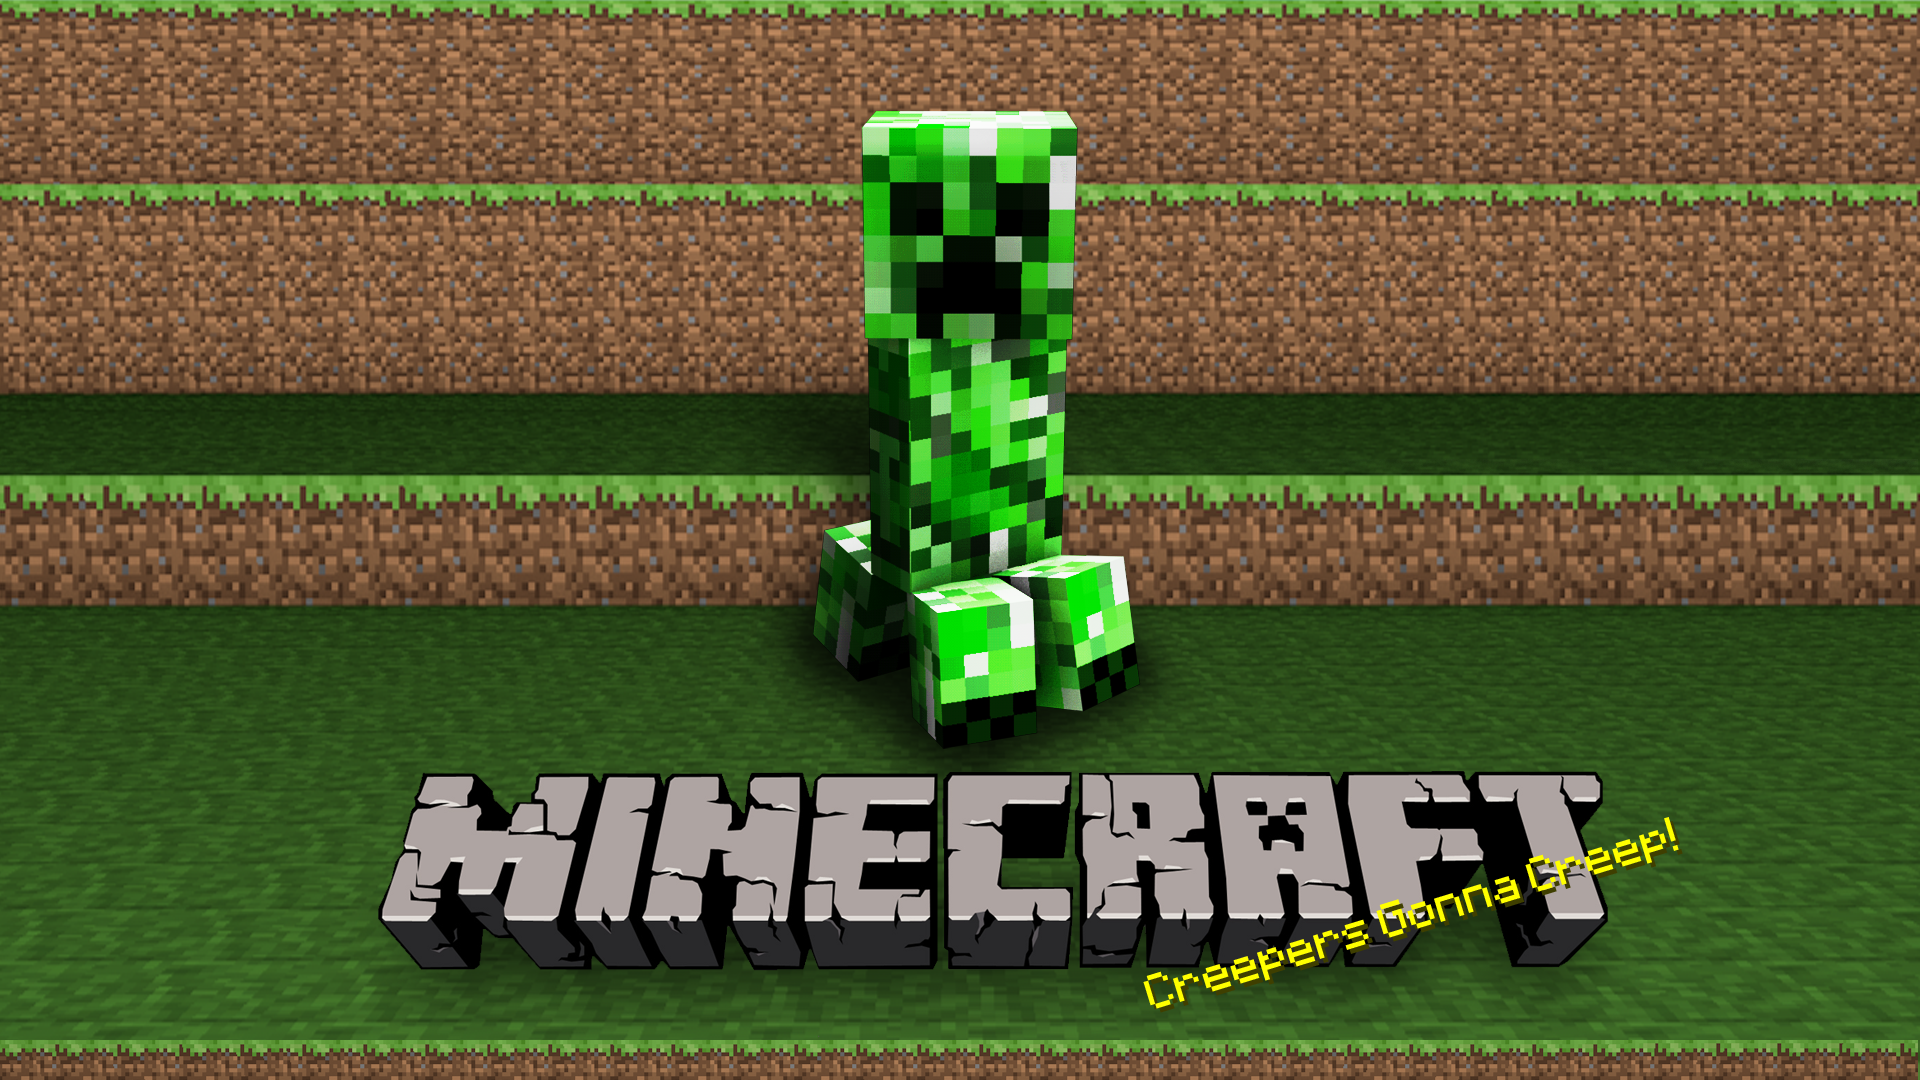 Awesome minecraft gaming wallpaper 1920x1080 hd creeper